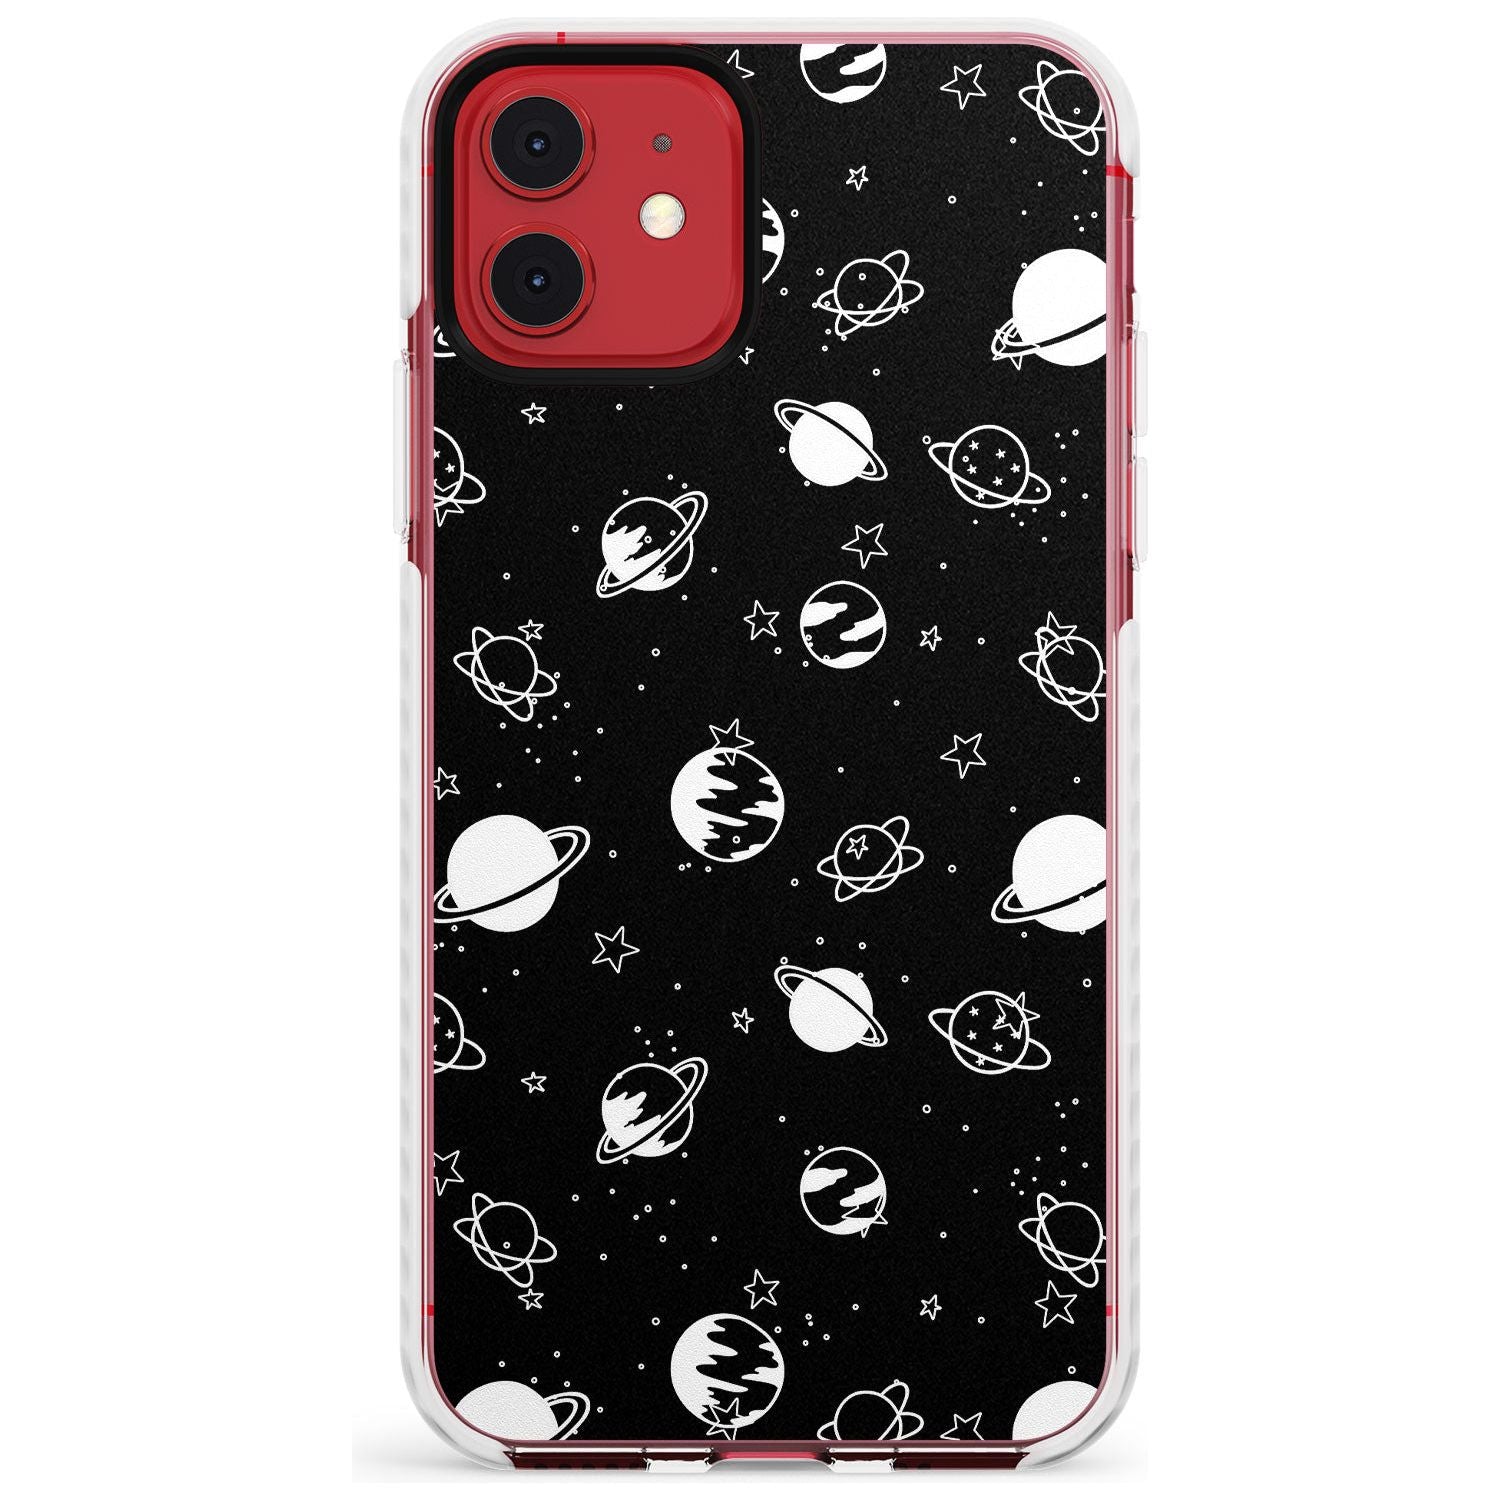 White Planets on Black Slim TPU Phone Case for iPhone 11